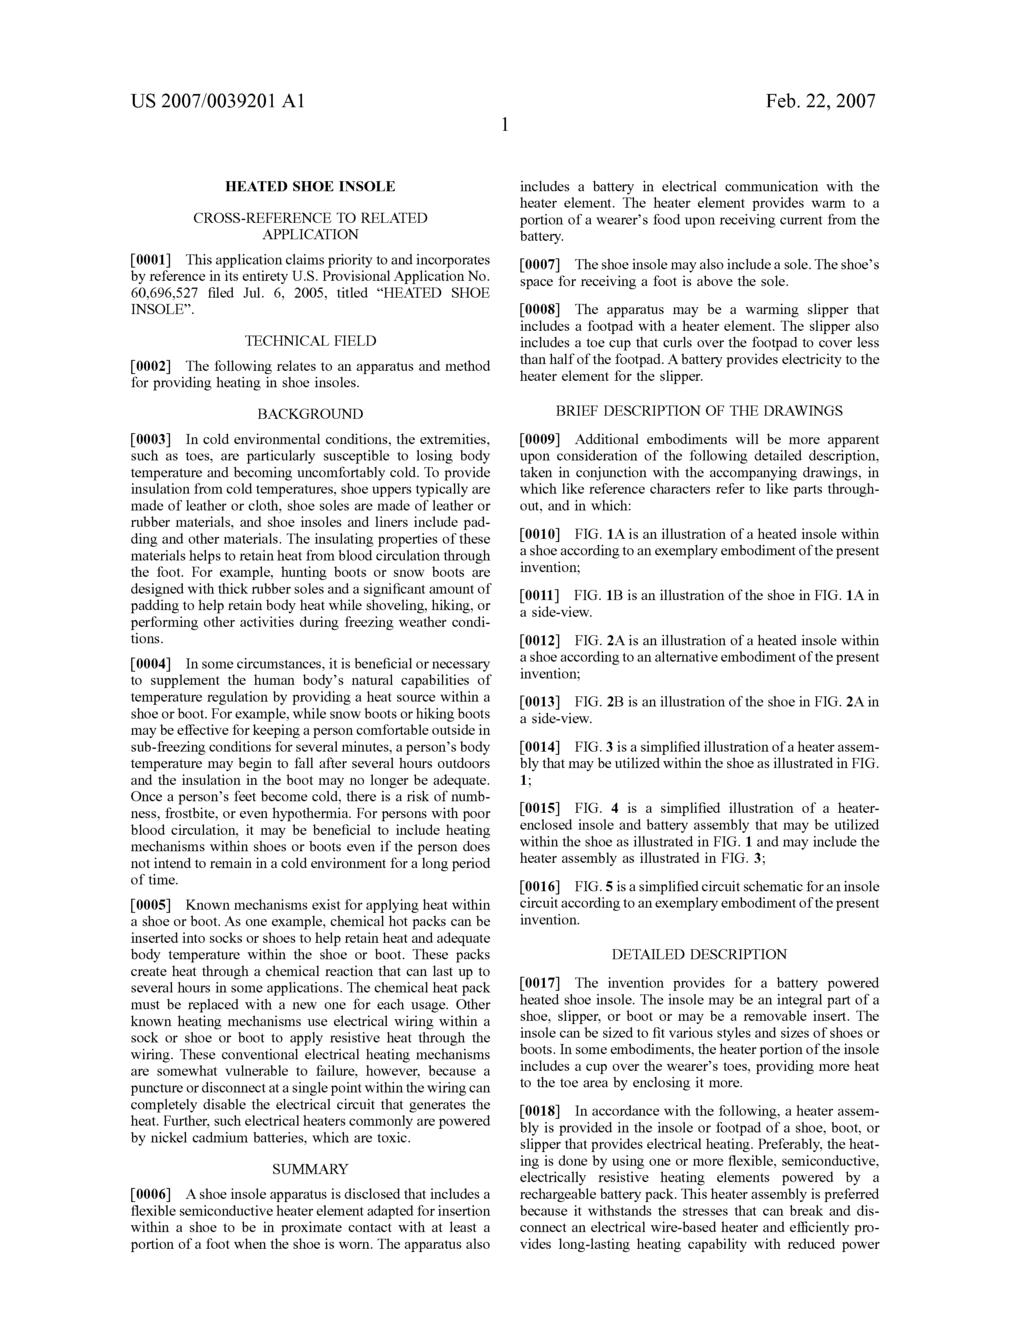 US 2007/0039201 A1 Feb. 22, 2007 HEATED SHOE NSOLE CROSS-REFERENCE TO RELATED APPLICATION 0001. This application claims priority to and incorporates by reference in its entirety U.S. Provisional Application No.